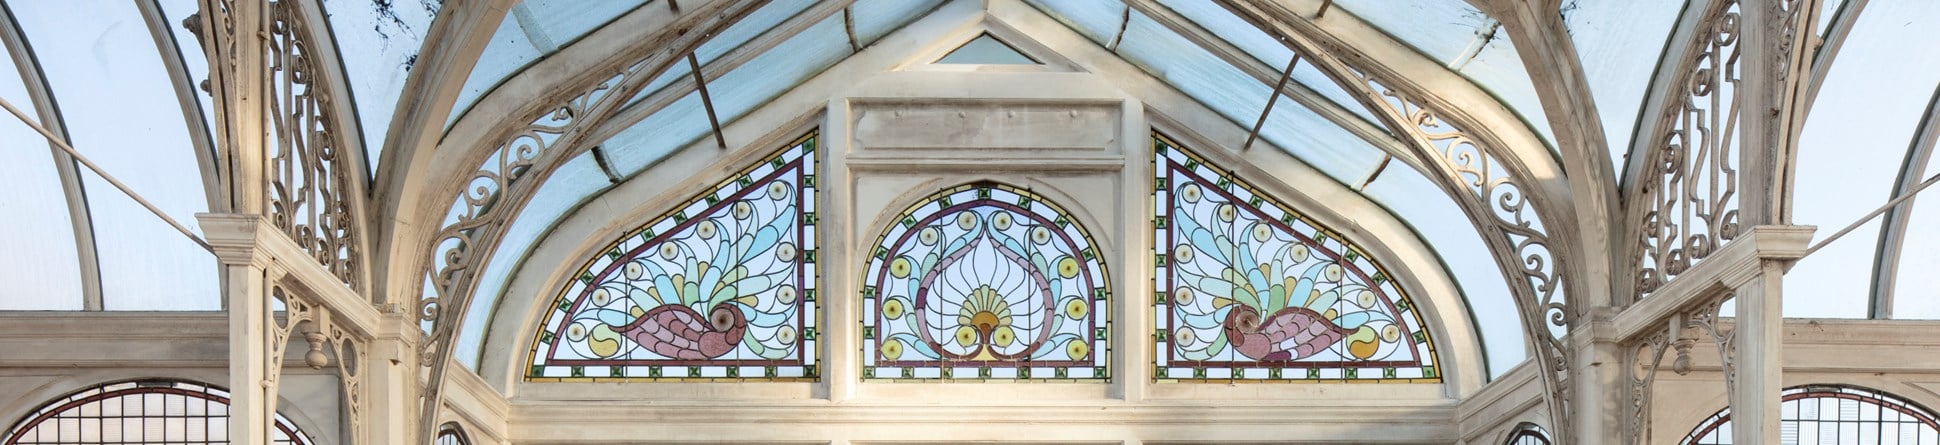 A white framed conservatory with decorative scrolled ironwork and, above plain glass windows, three beautifully decorated panels showing birds and a central peacock feather design.